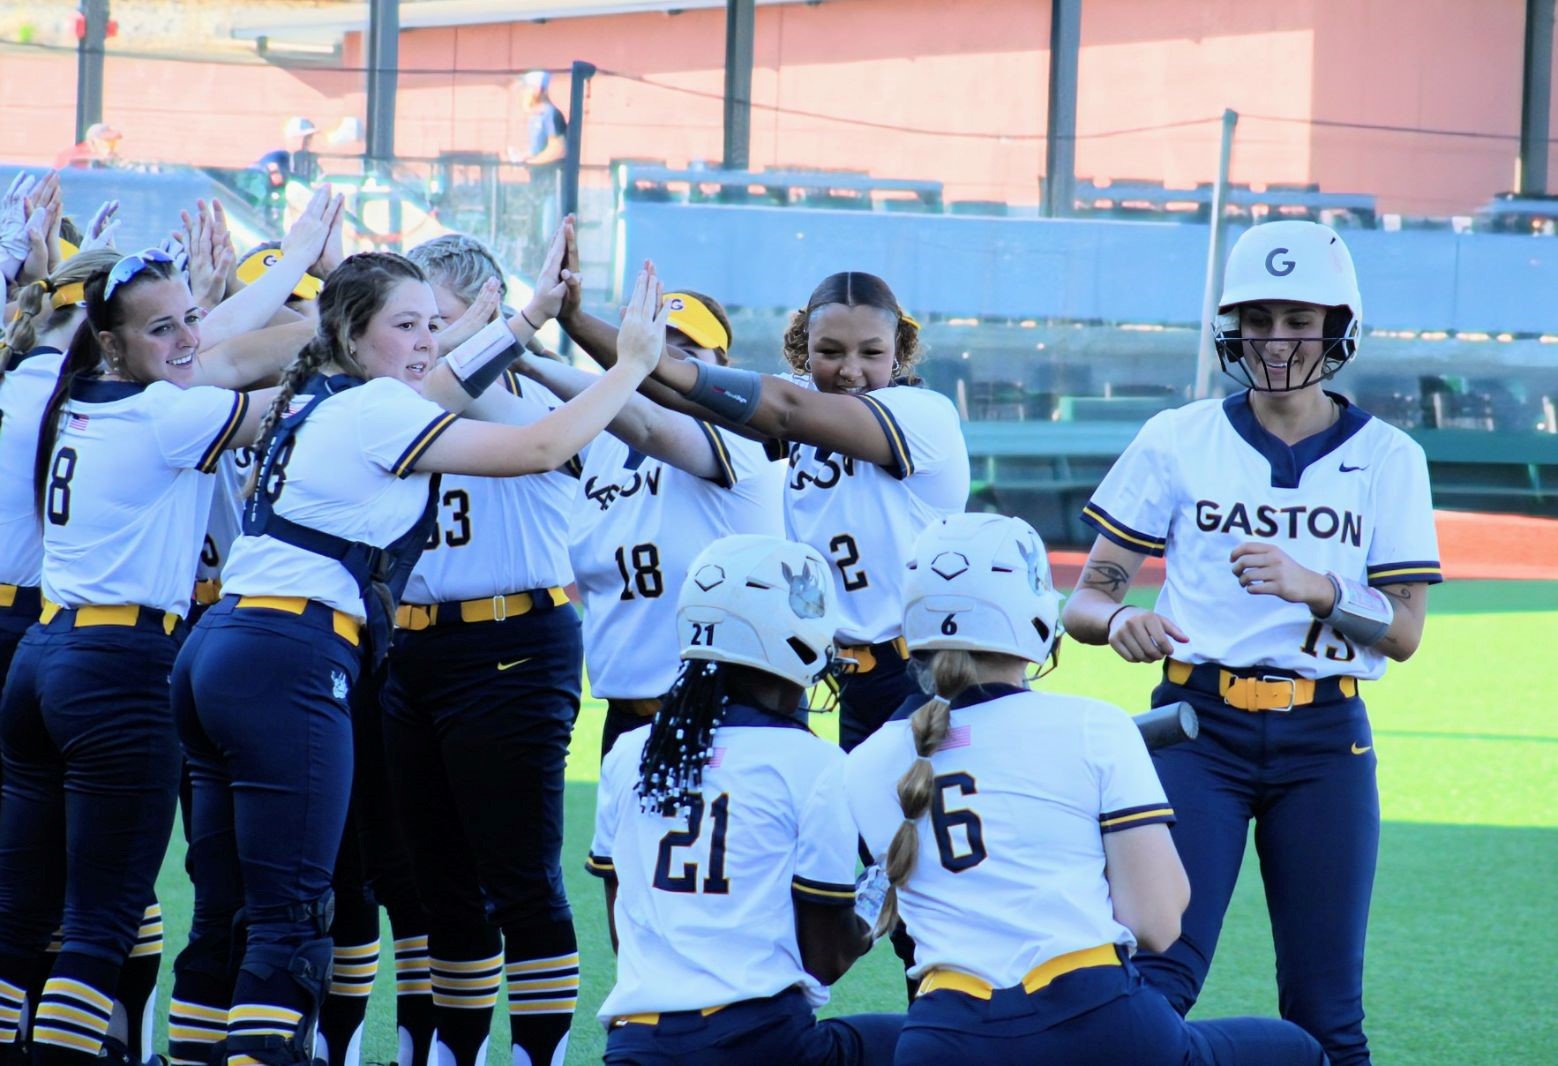 After Dakota Marshall (far right) hit her first college home run, her Gaston College teammates celebrate at home plate.